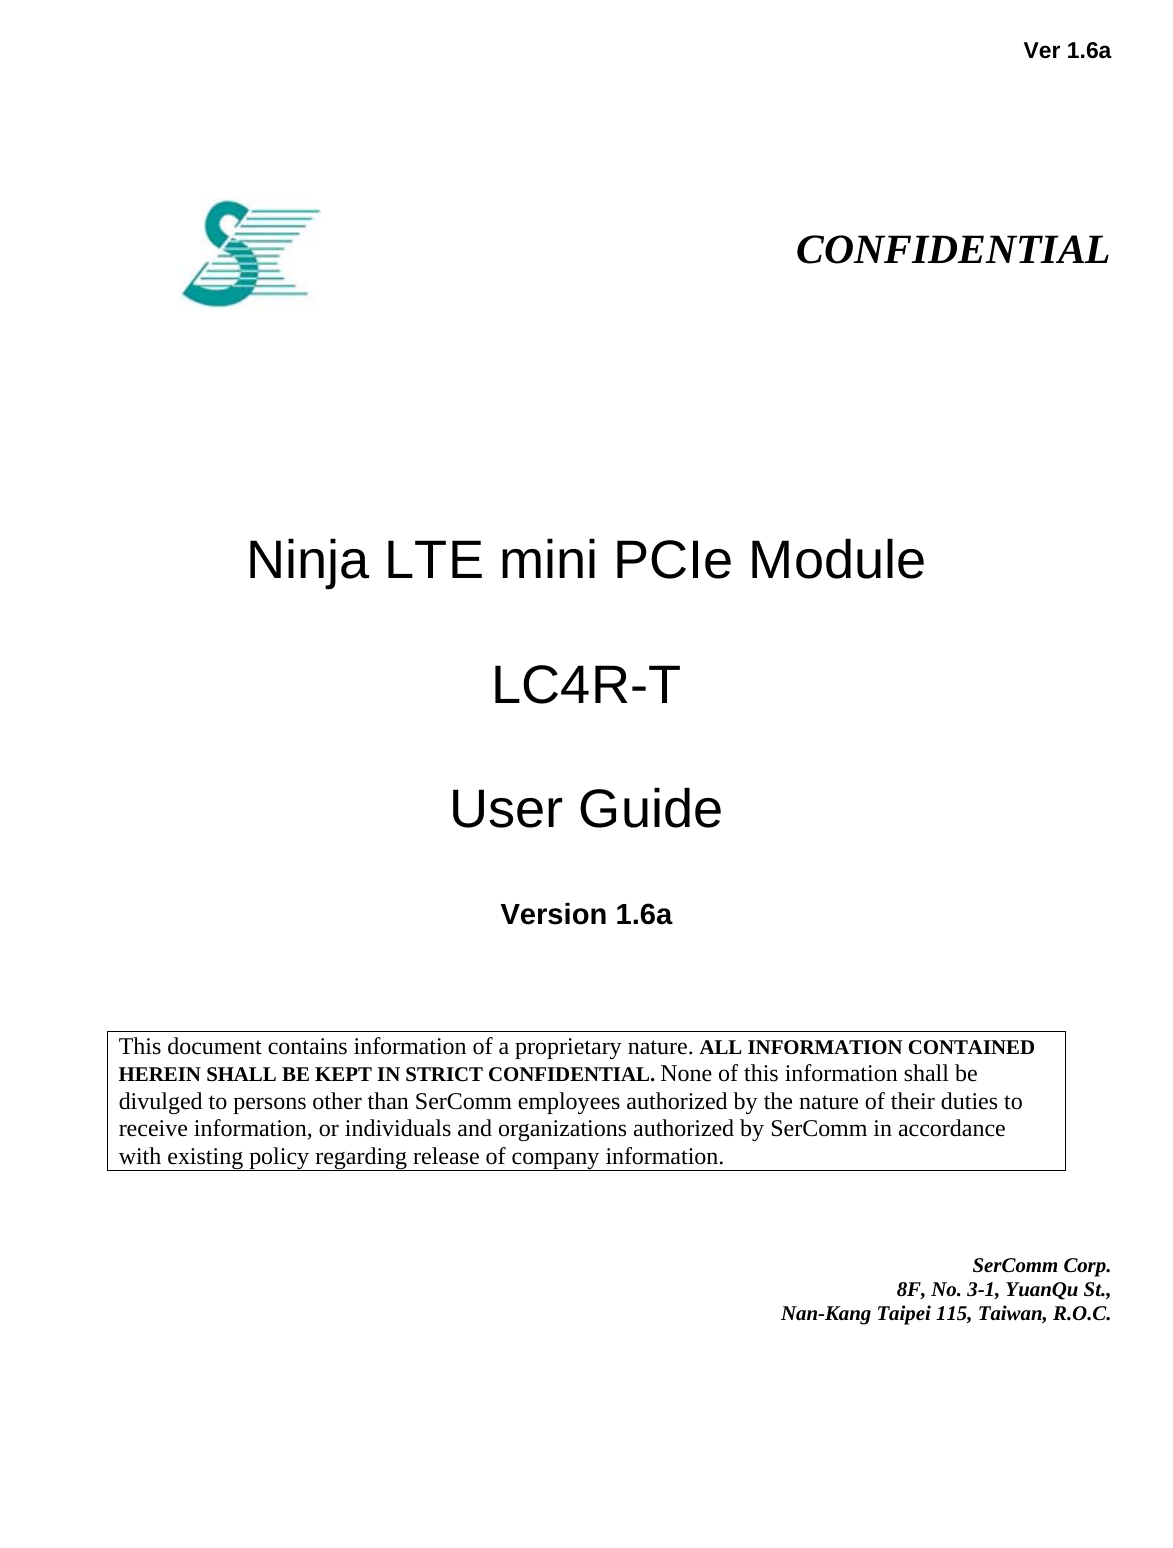   Ver 1.6a                                                                                                                     CONFIDENTIAL            Ninja LTE mini PCIe Module   LC4R-T   User Guide  Version 1.6a                                                                                                                                                                                                    This document contains information of a proprietary nature. ALL INFORMATION CONTAINED HEREIN SHALL BE KEPT IN STRICT CONFIDENTIAL. None of this information shall be divulged to persons other than SerComm employees authorized by the nature of their duties to receive information, or individuals and organizations authorized by SerComm in accordance with existing policy regarding release of company information.       SerComm Corp.  8F, No. 3-1, YuanQu St.,  Nan-Kang Taipei 115, Taiwan, R.O.C. 